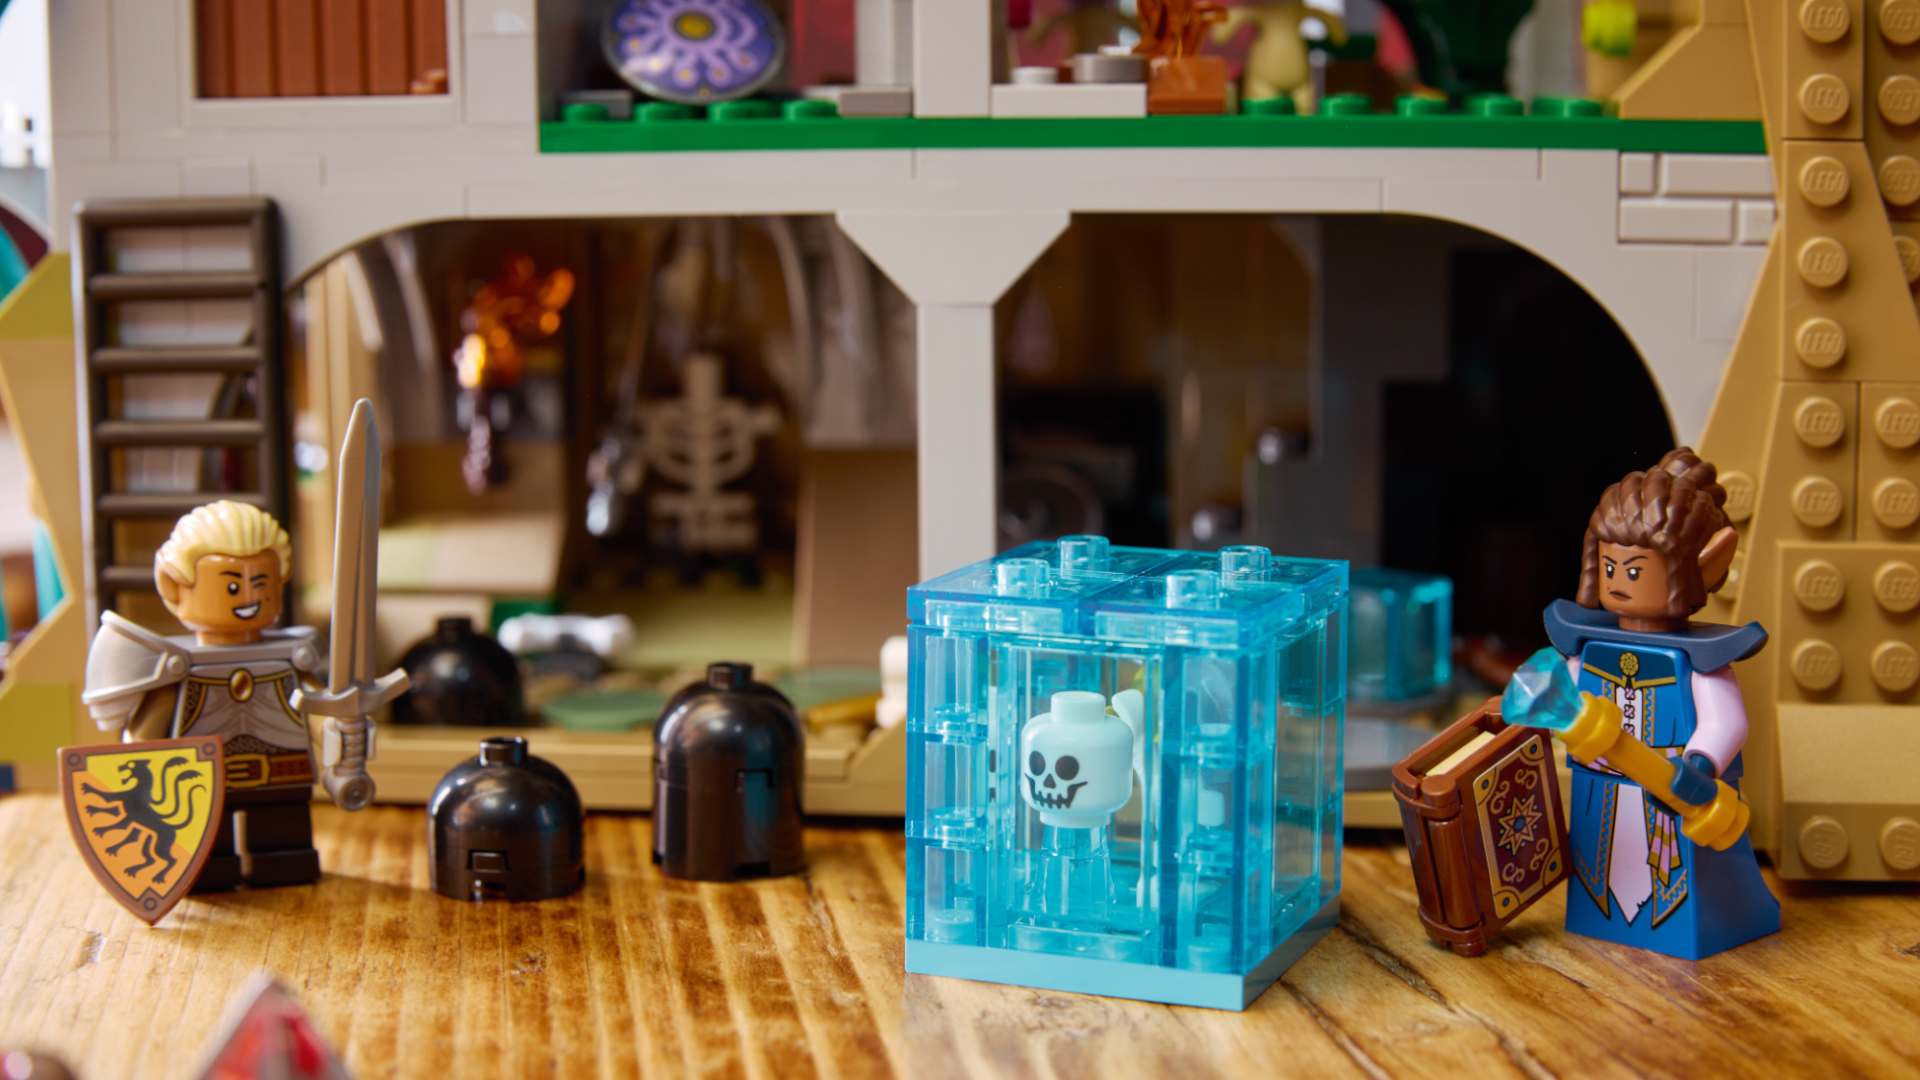 Lego Dungeons & Dragons set with adventurer minifigures and a Gelatinous Cube in the foreground